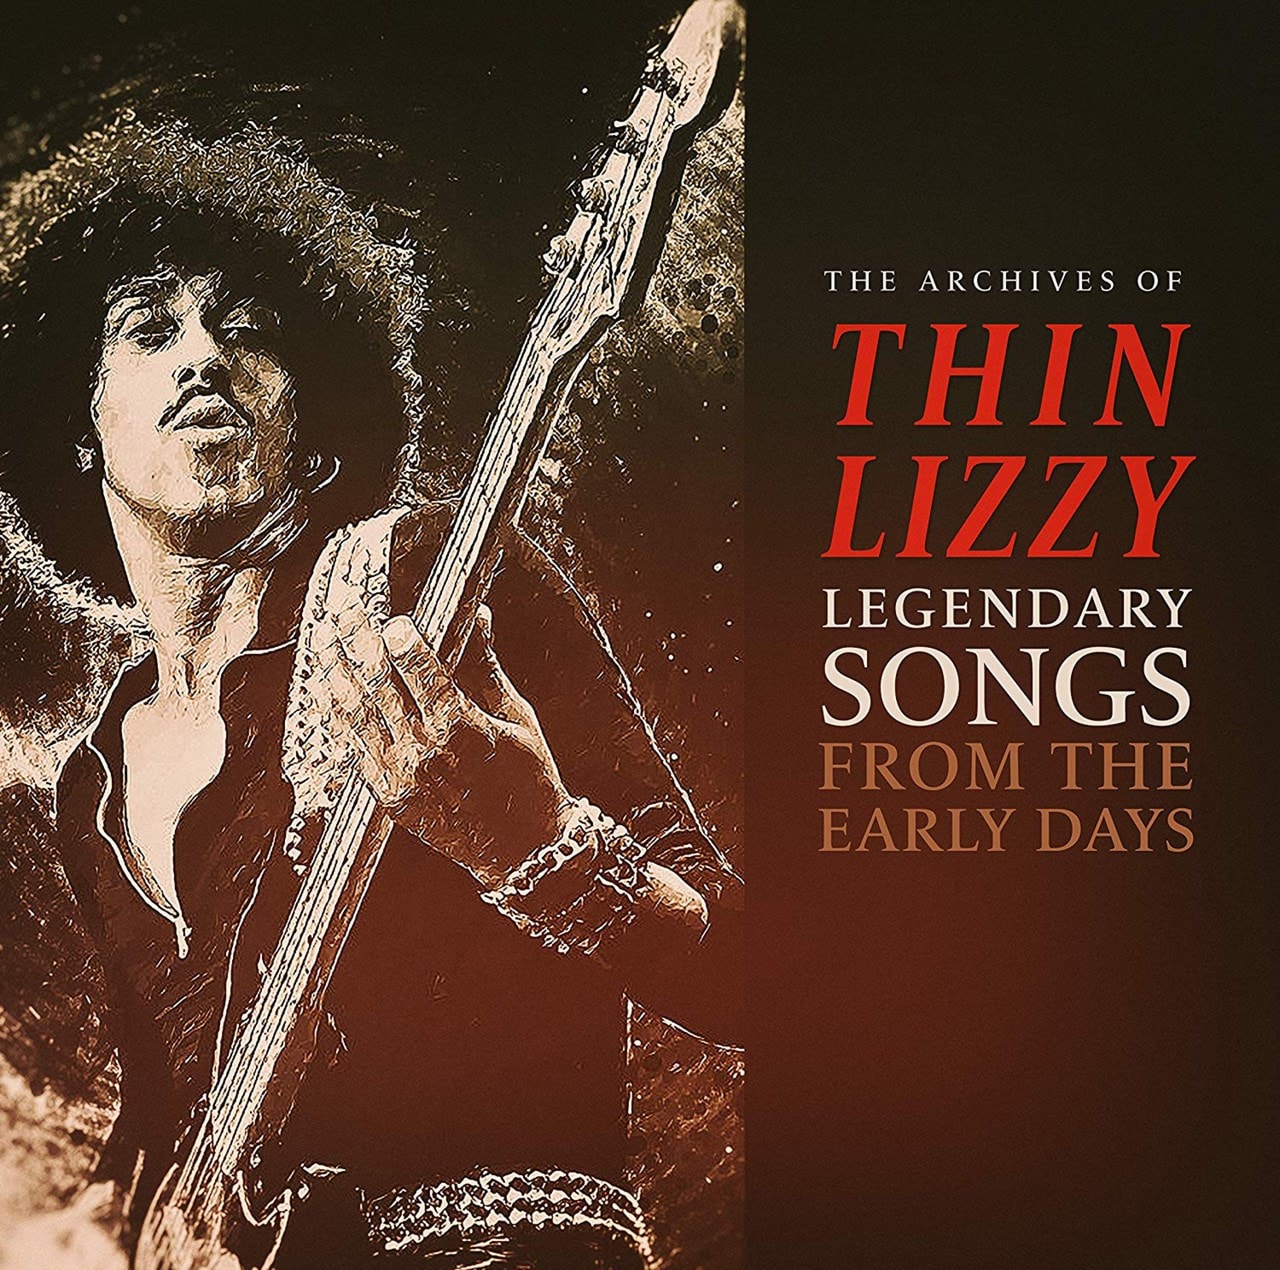 The Archives Of Thin Lizzy Legendary Songs From The Early Days Vinyl 12 Album Free Shipping Over 20 Hmv Store